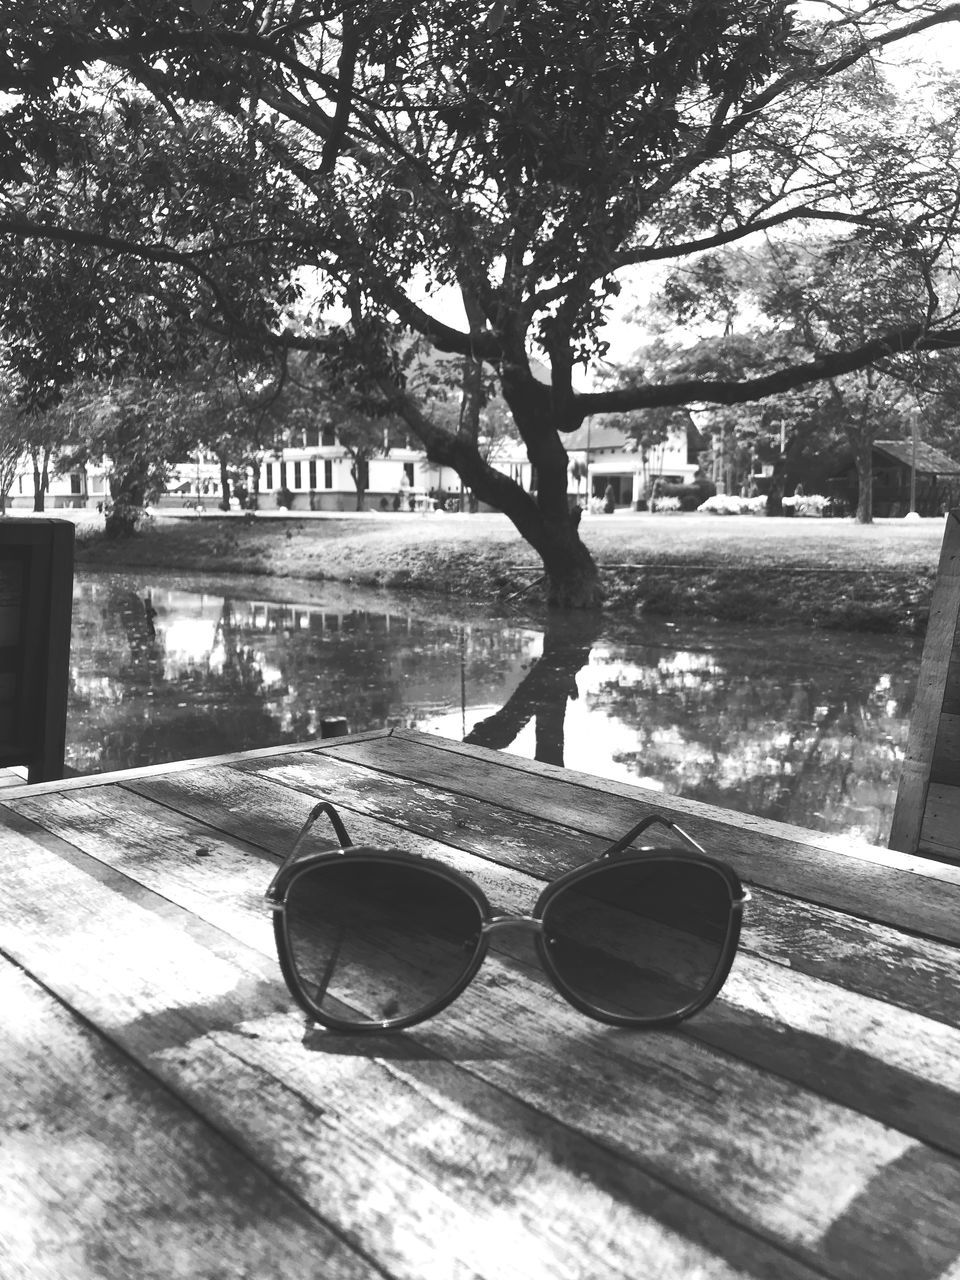 tree, glasses, plant, sunglasses, day, fashion, nature, no people, architecture, outdoors, water, wood - material, built structure, reflection, wood, table, building exterior, sunlight, absence, personal accessory, canal, eyewear